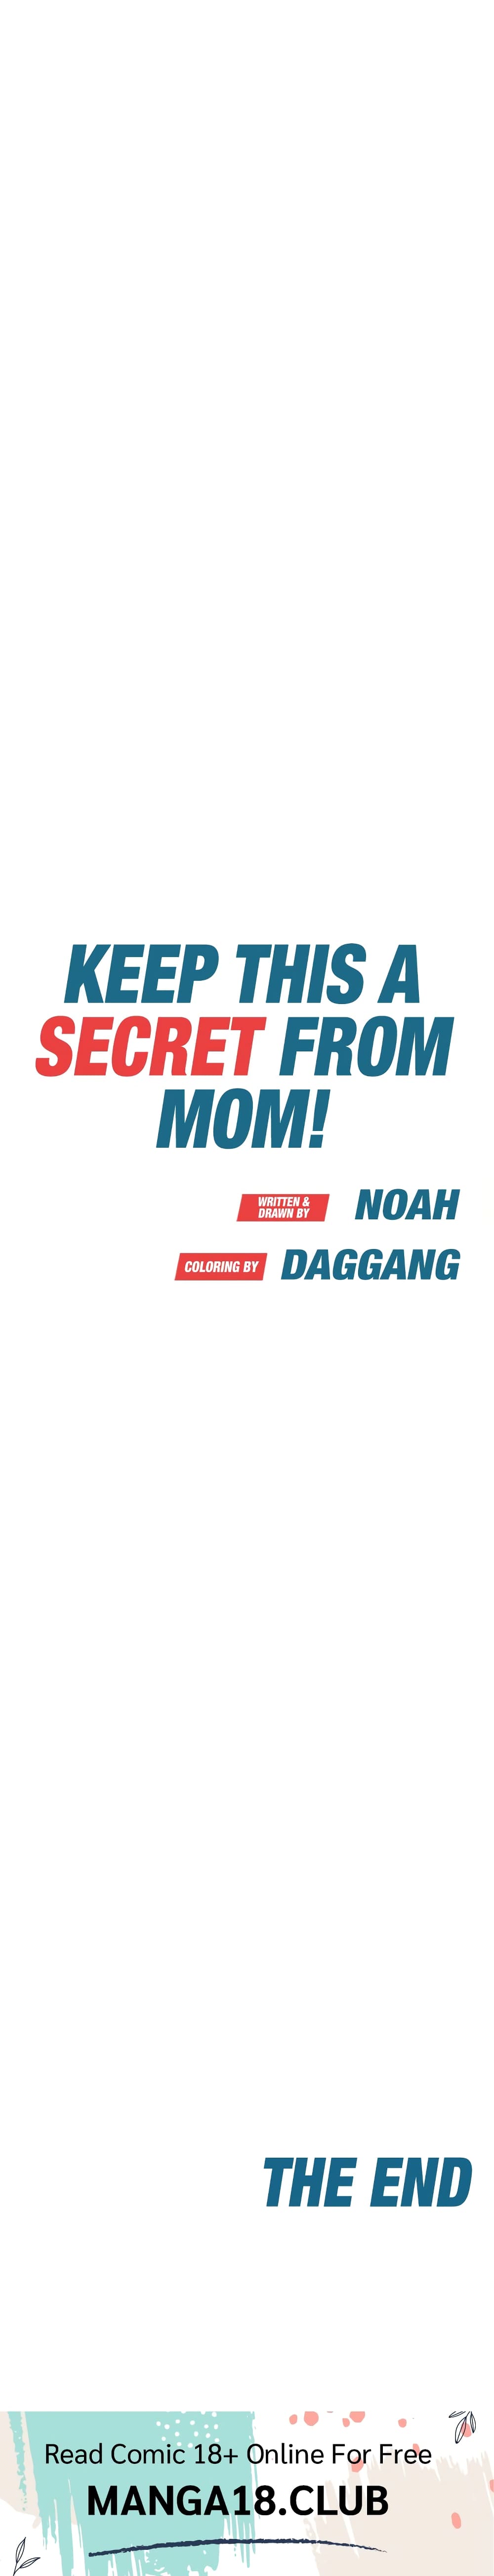 Keep it A Secret from Your Mother! 100 ภาพที่ 33